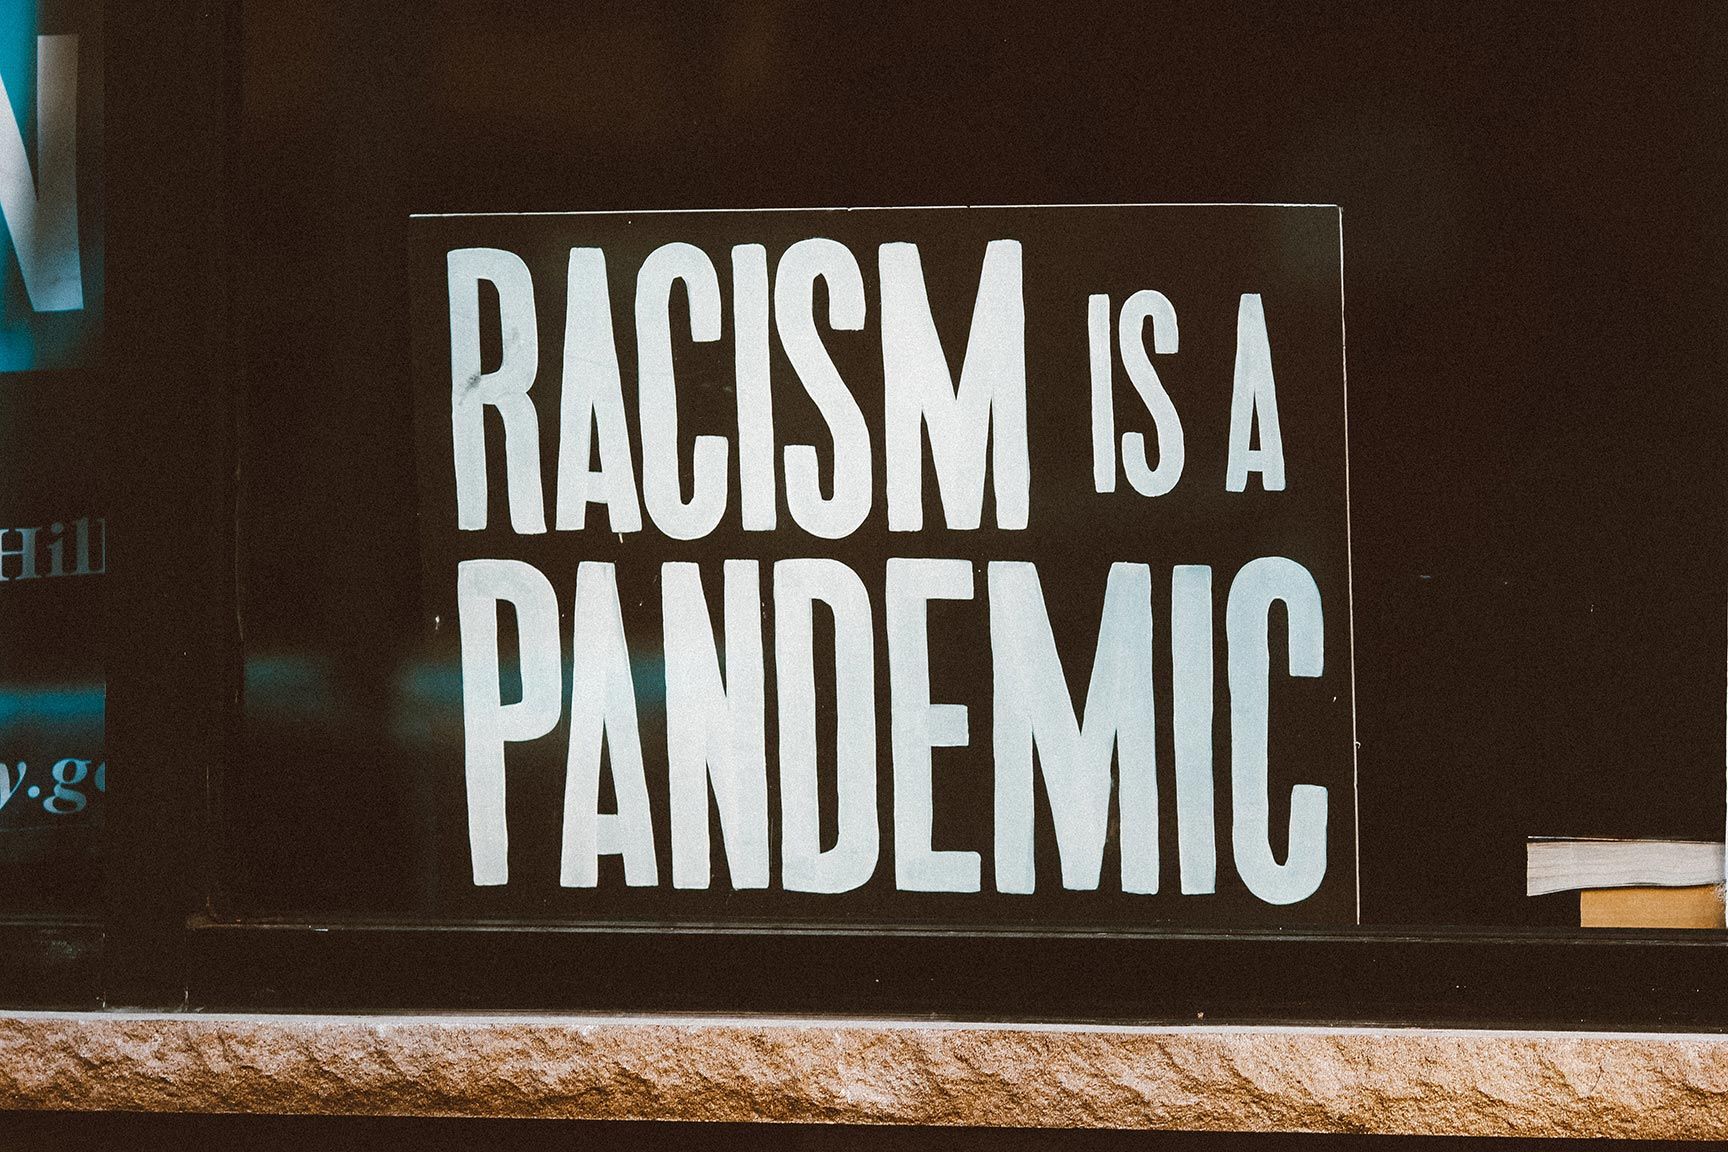 A sign reading "RACISM IS A PANDEMIC"